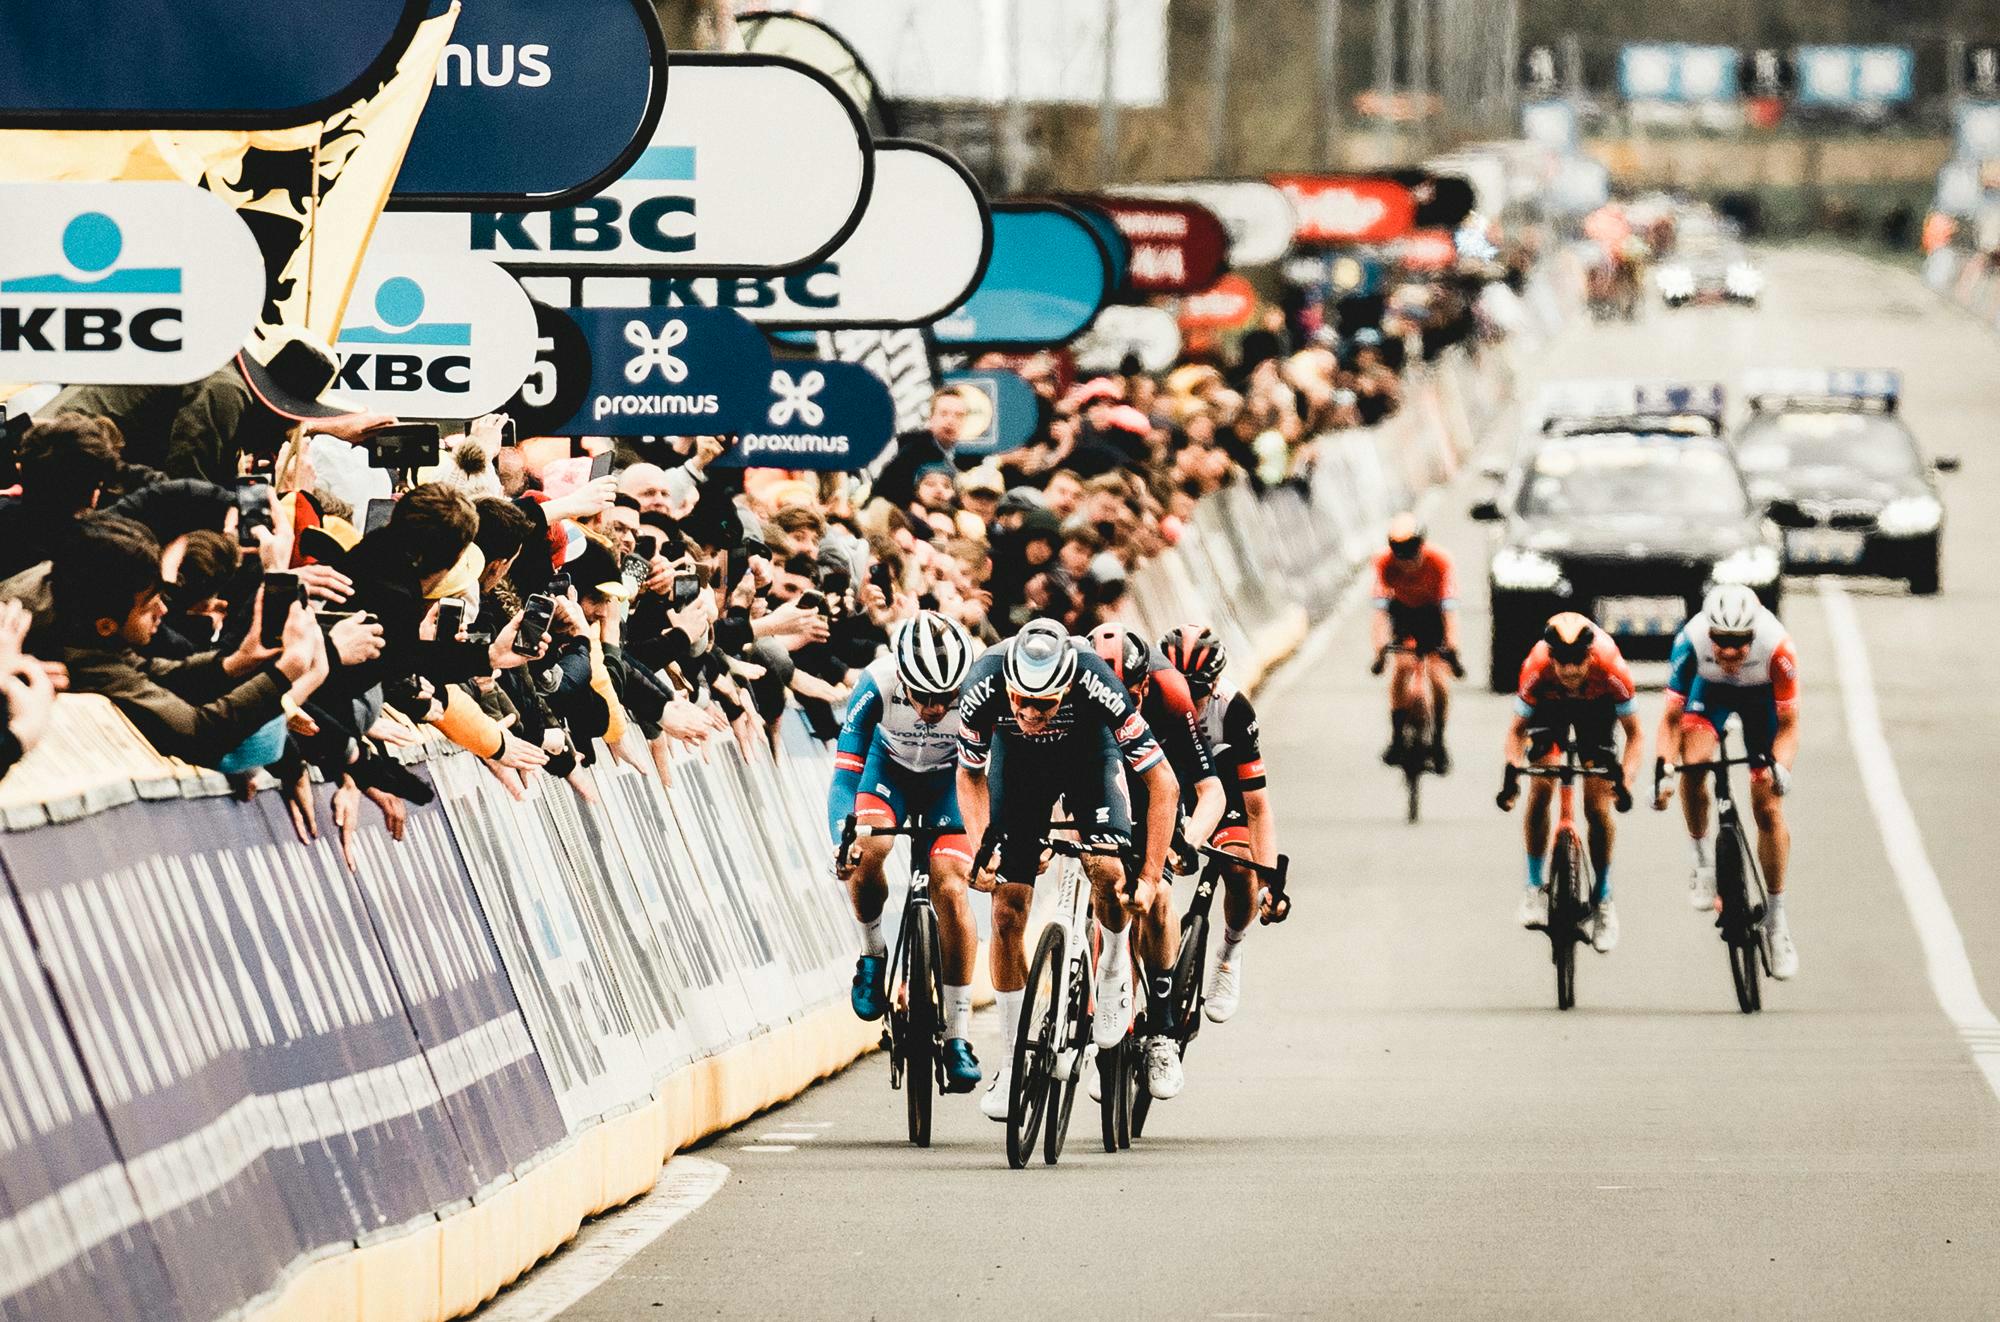 Van der Poel sprints for third year in a row and takes second win